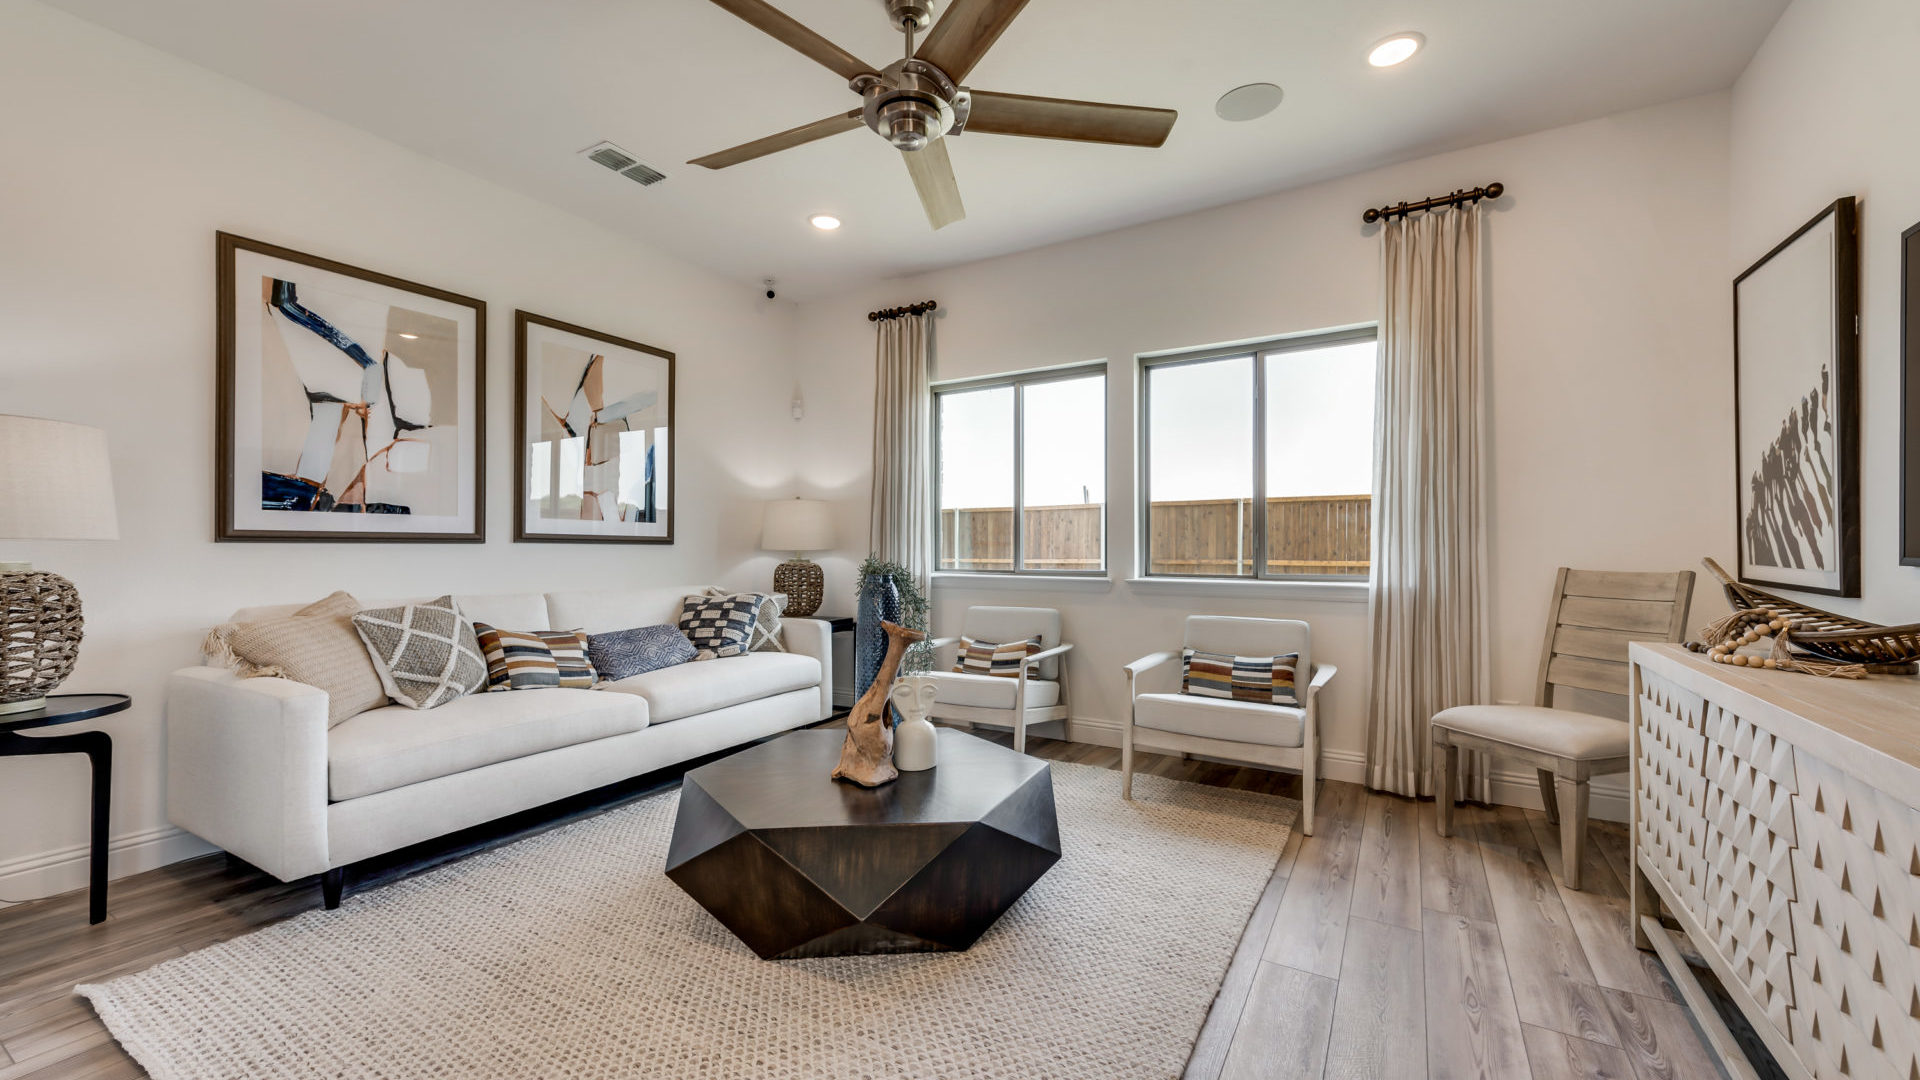 Lake Park Villas - New Model Now Open! new homes in Wylie, TX